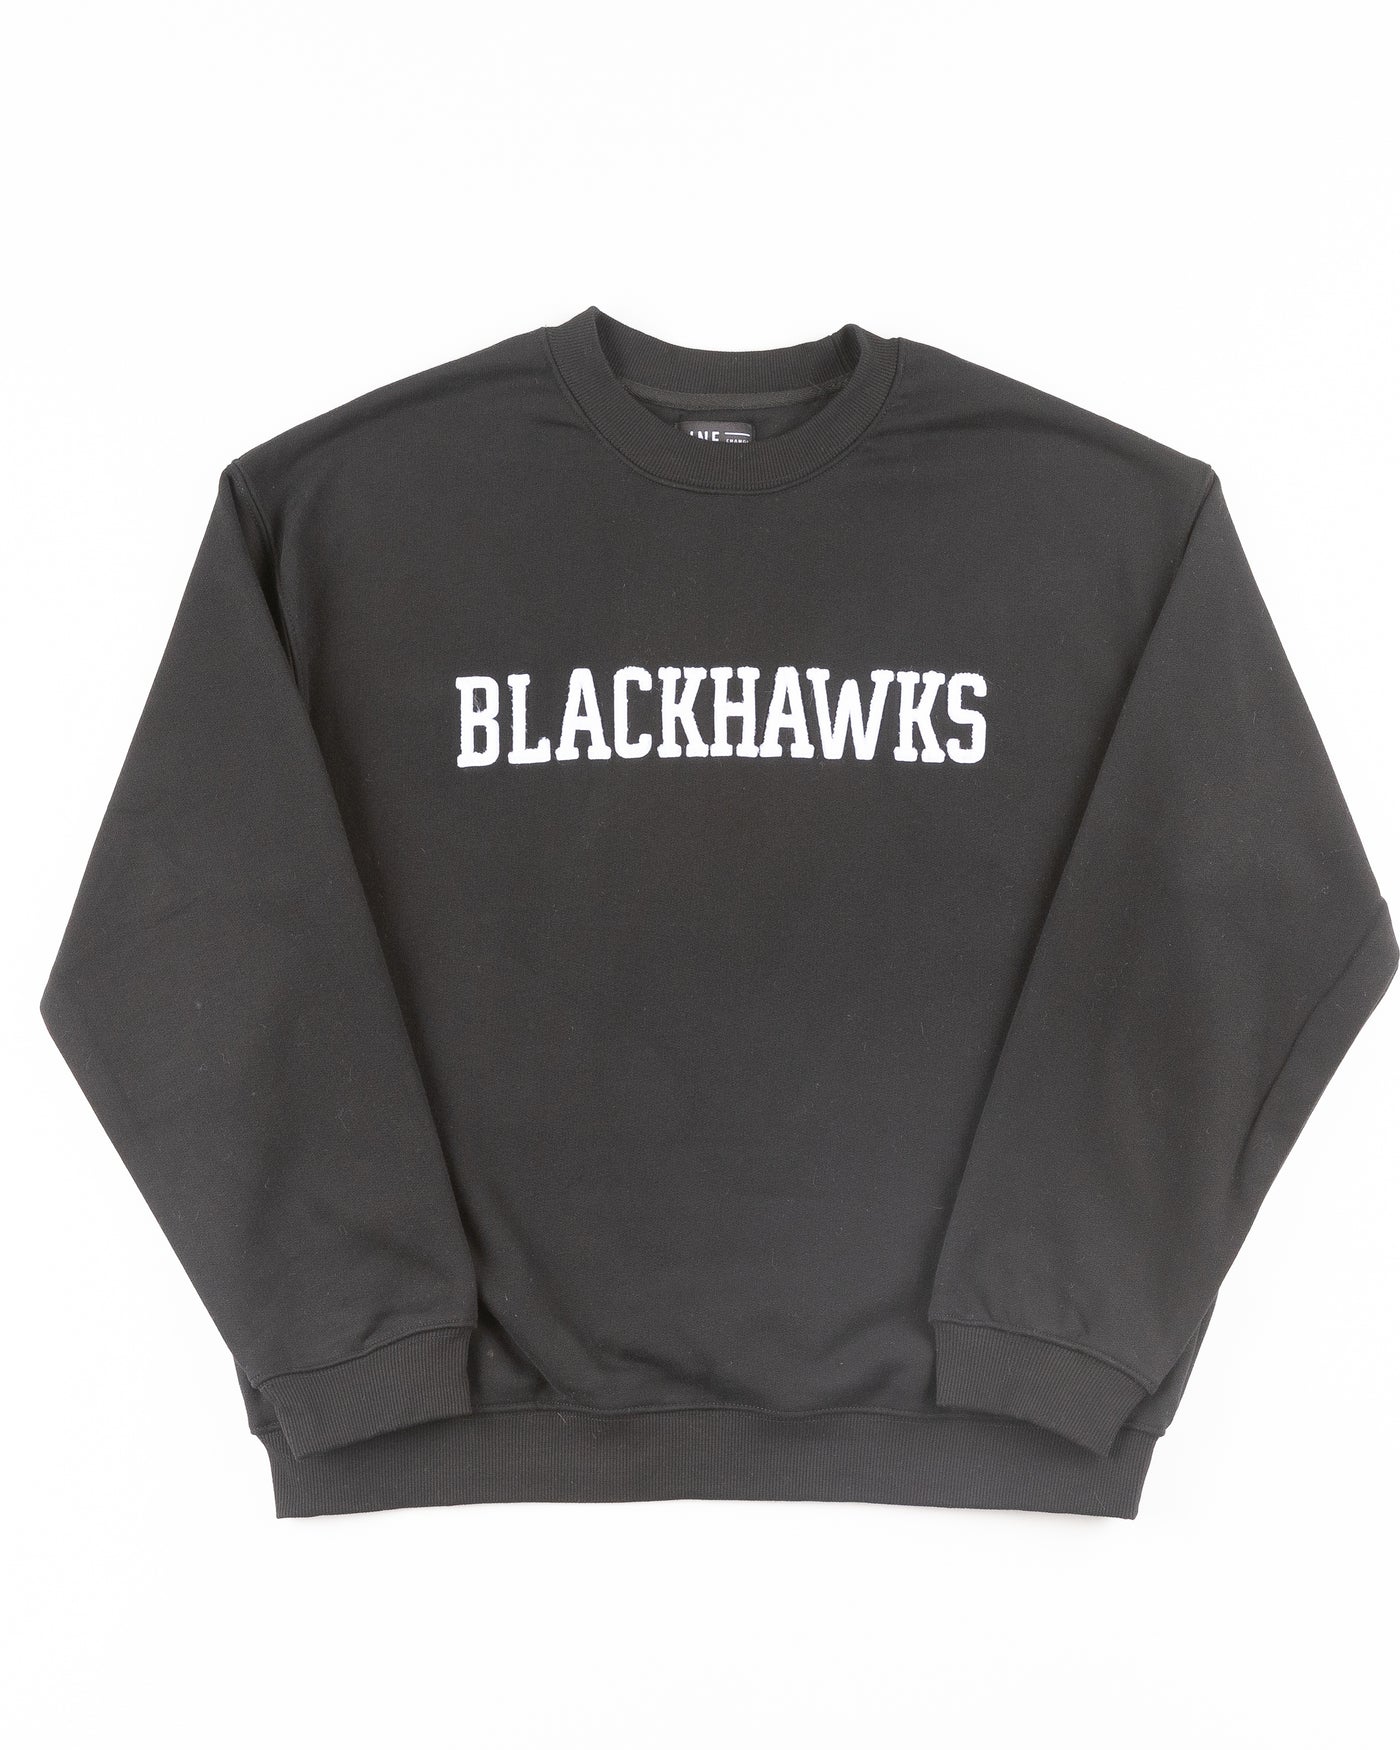 black Line Change crewneck with chenille Blackhawks embroidery across front - front lay flat